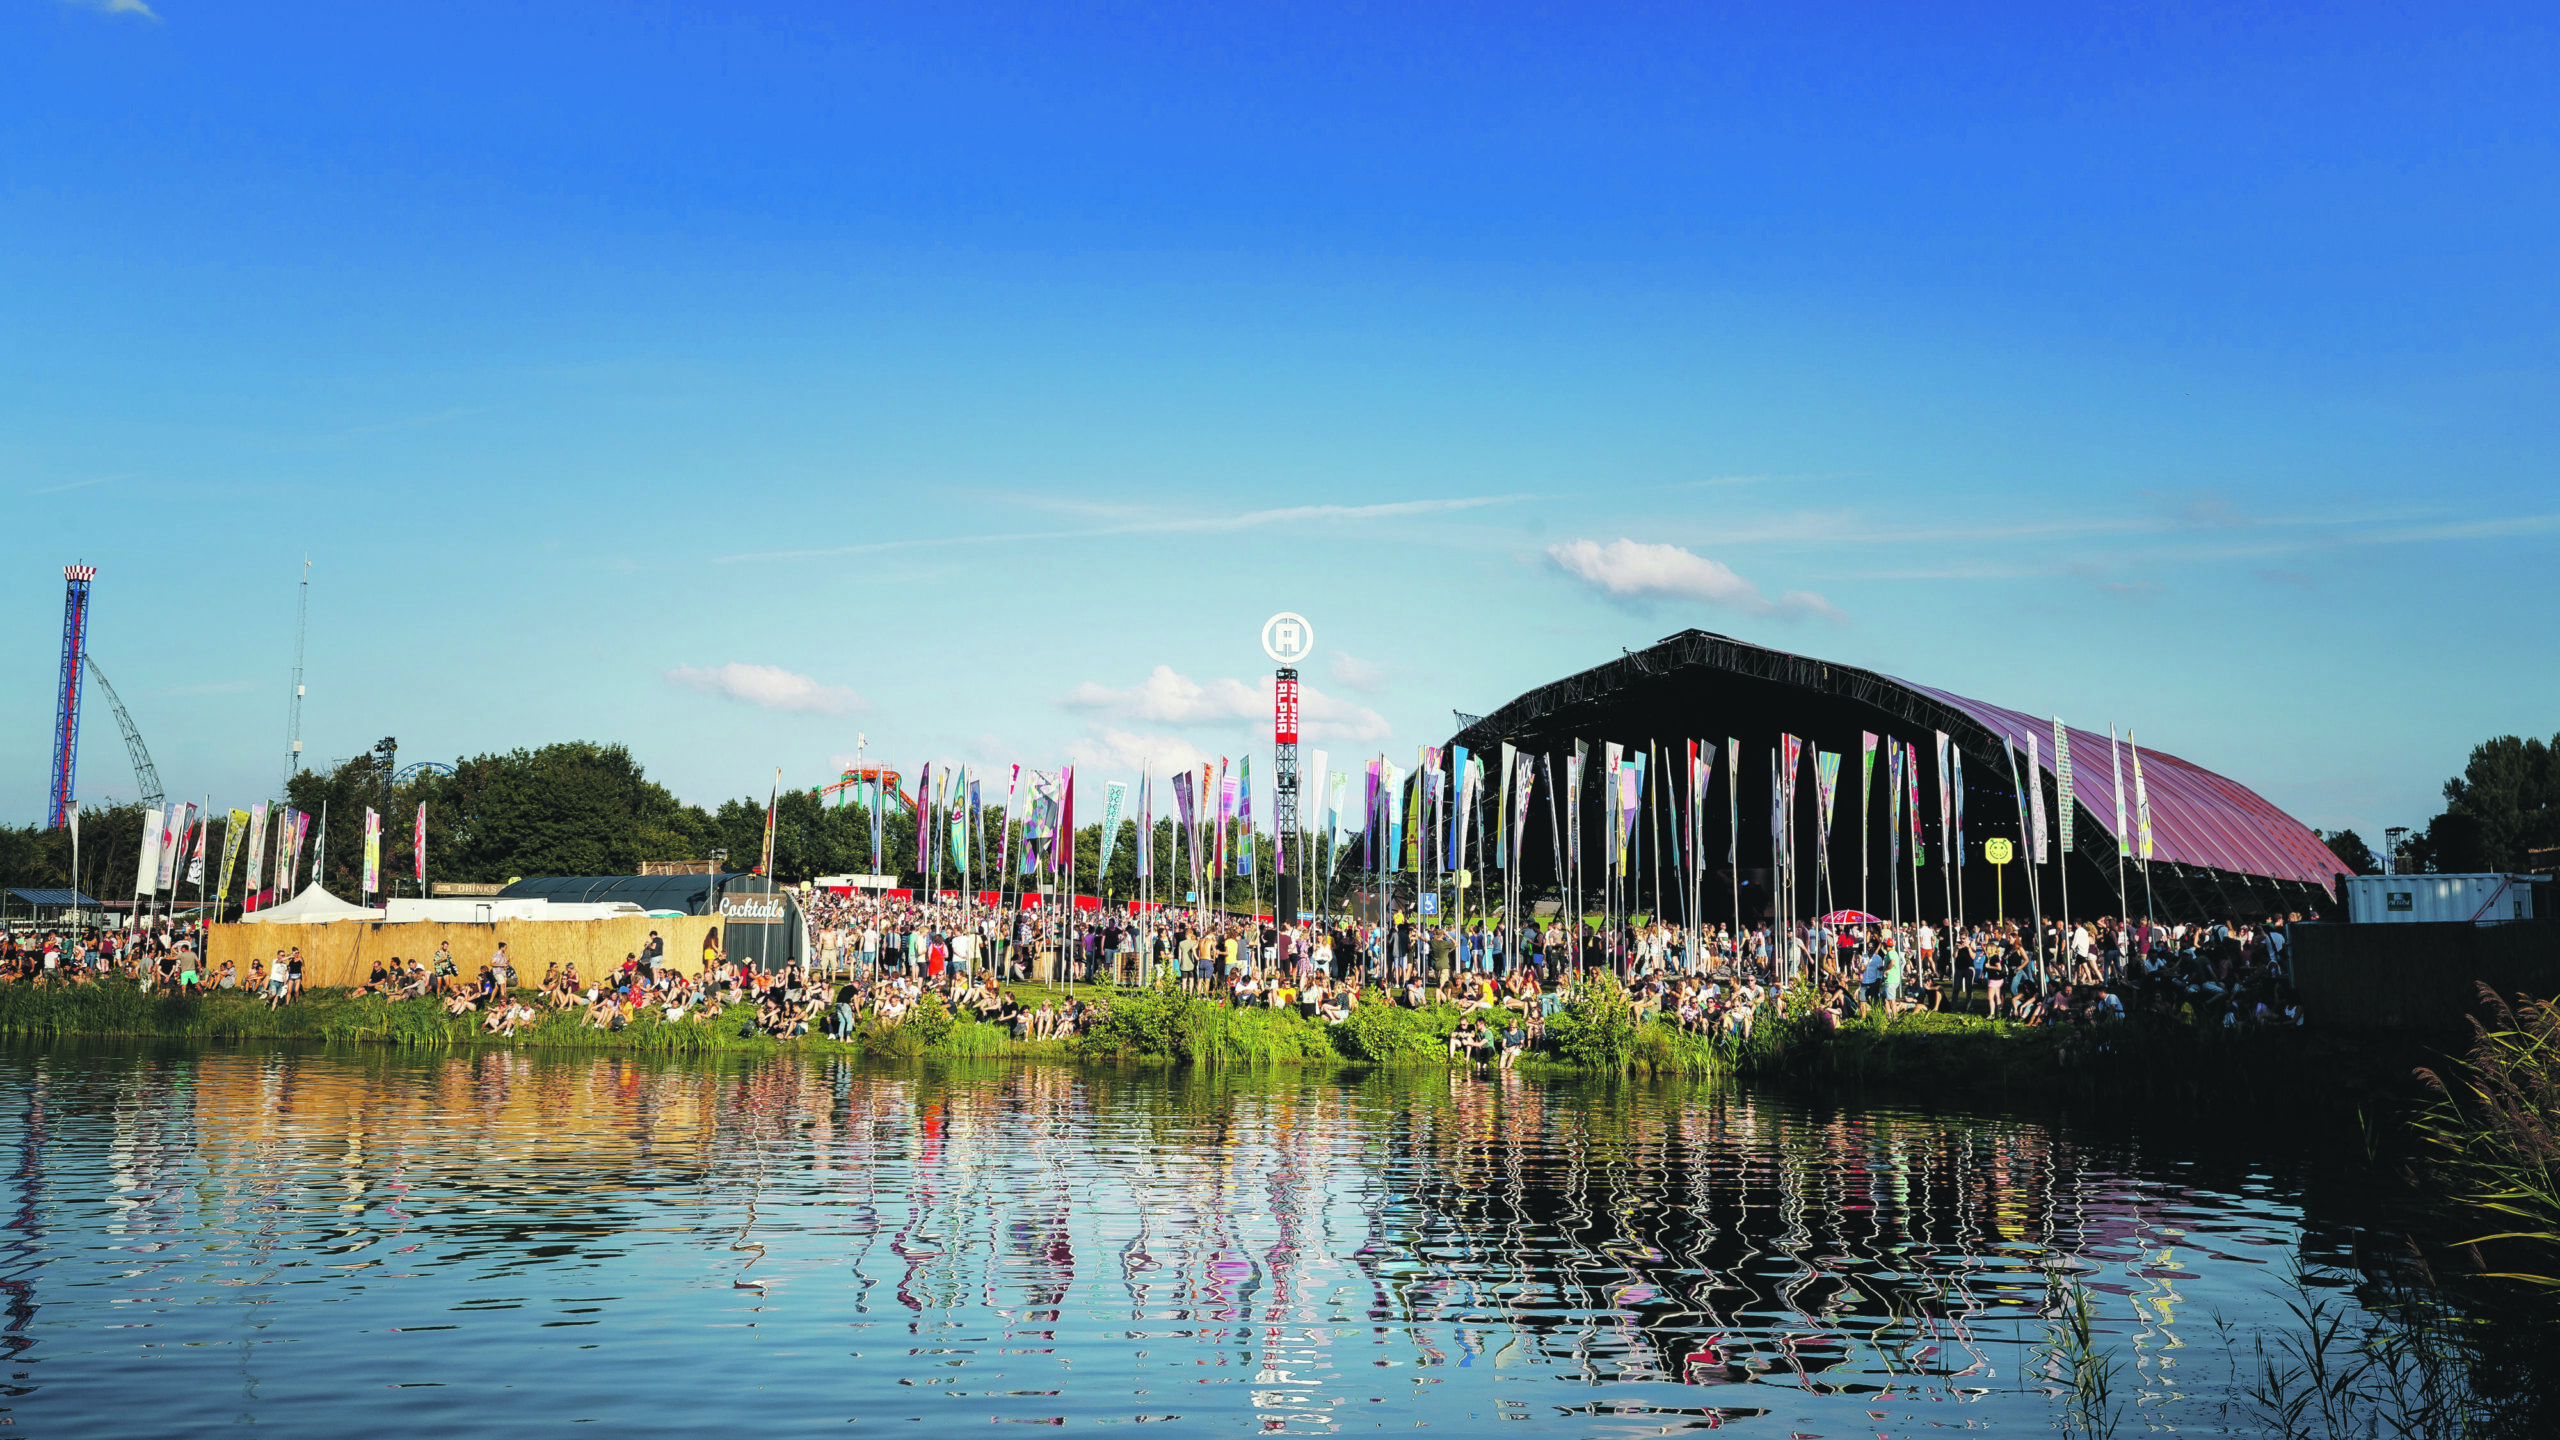 By the bank of a river, music lovers enjoy the Lowlands festival in the Netherlands.